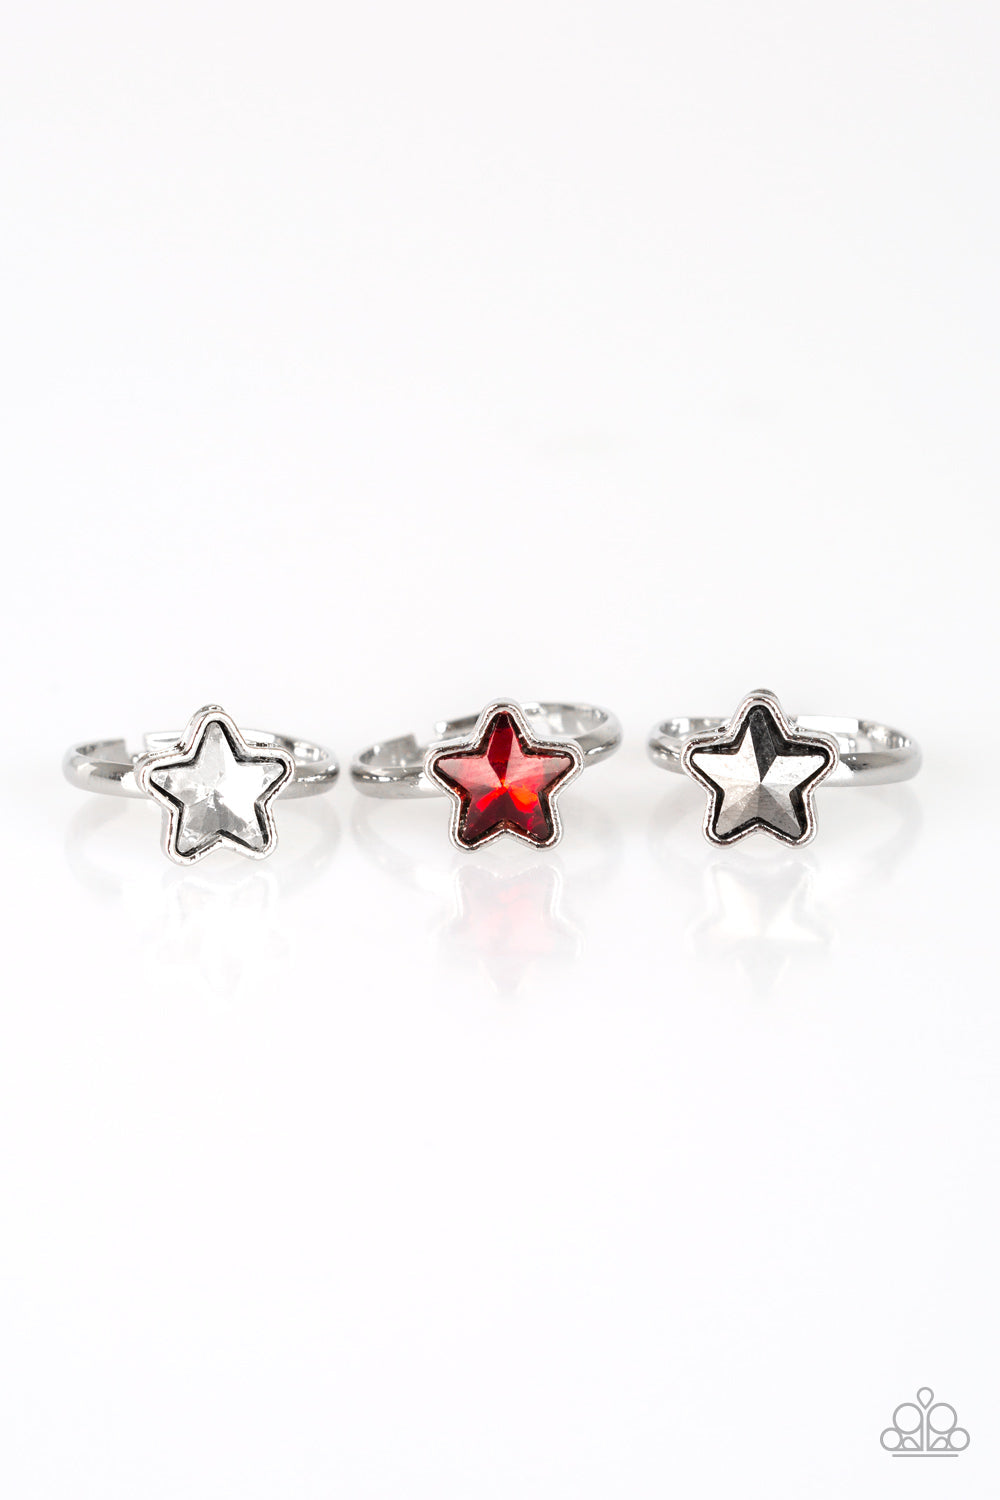 Paparazzi Starlet Shimmer Rings - 10 - Red, White, Clear and Blue Stars - $5 Jewelry With Ashley Swint